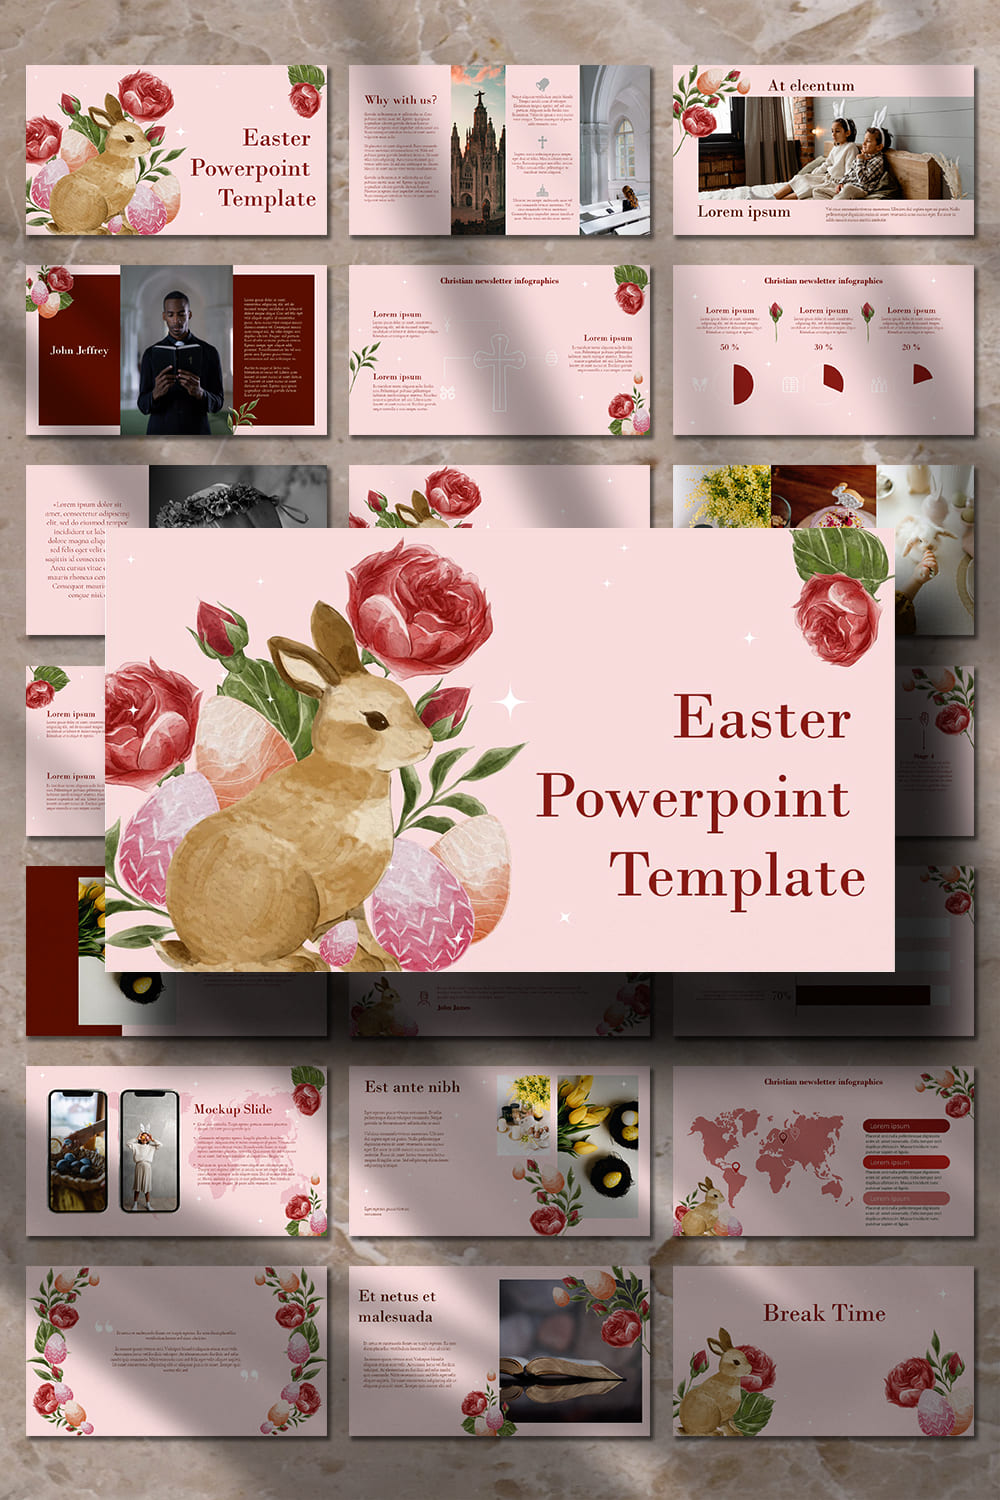 Easter Powerpoint Template - pinterest image preview.